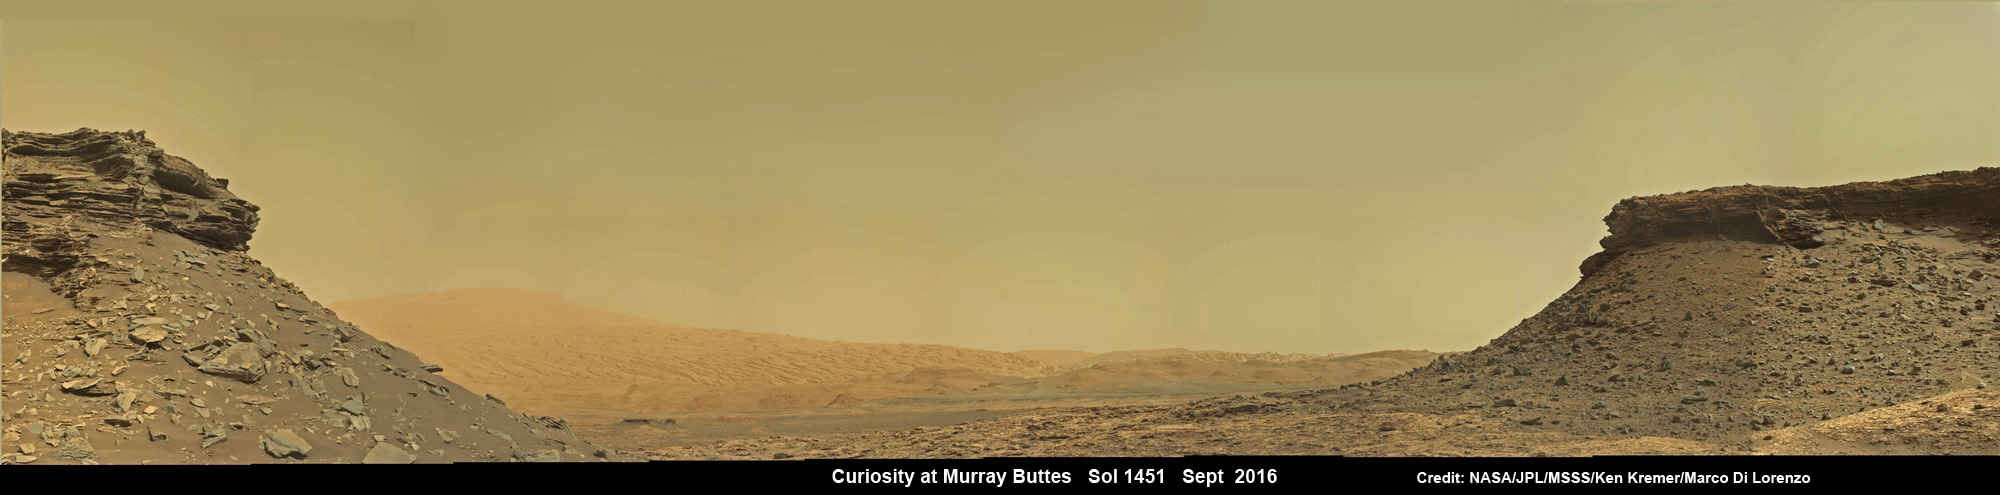 Wide angle mosaic shows lower region of Mount Sharp at center in between spectacular sloping hillsides  and layered rock outcrops of the Murray Buttes region in Gale Crater as imaged by the Mast Camera (Mastcam) on NASA's Curiosity Mars rover. This photo mosaic is stitched from Mastcam camera raw images taken on Sol 1451, Sept. 5, 2016 with added artificial sky.  Credit: NASA/JPL/MSSS/Ken Kremer/kenkremer.com/Marco Di Lorenzo